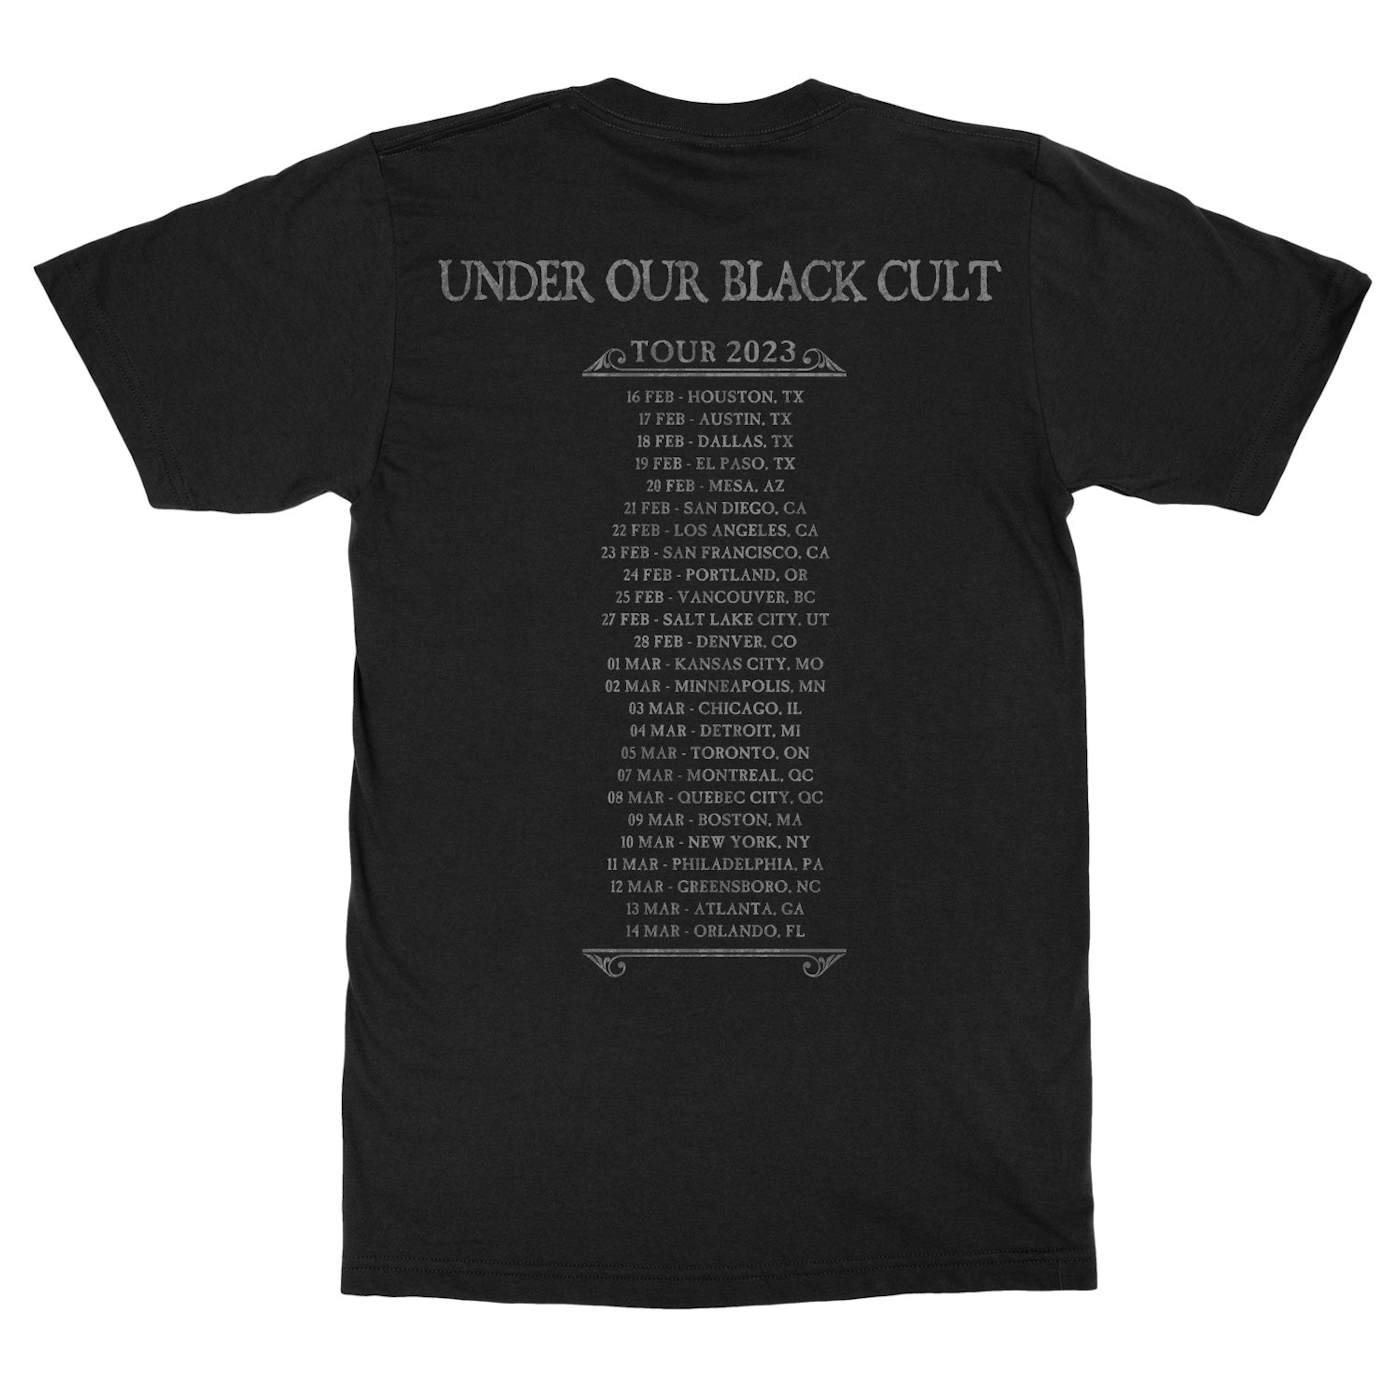 Rotting Christ "2023 Under Our Black Cult Tour tee" T-Shirt